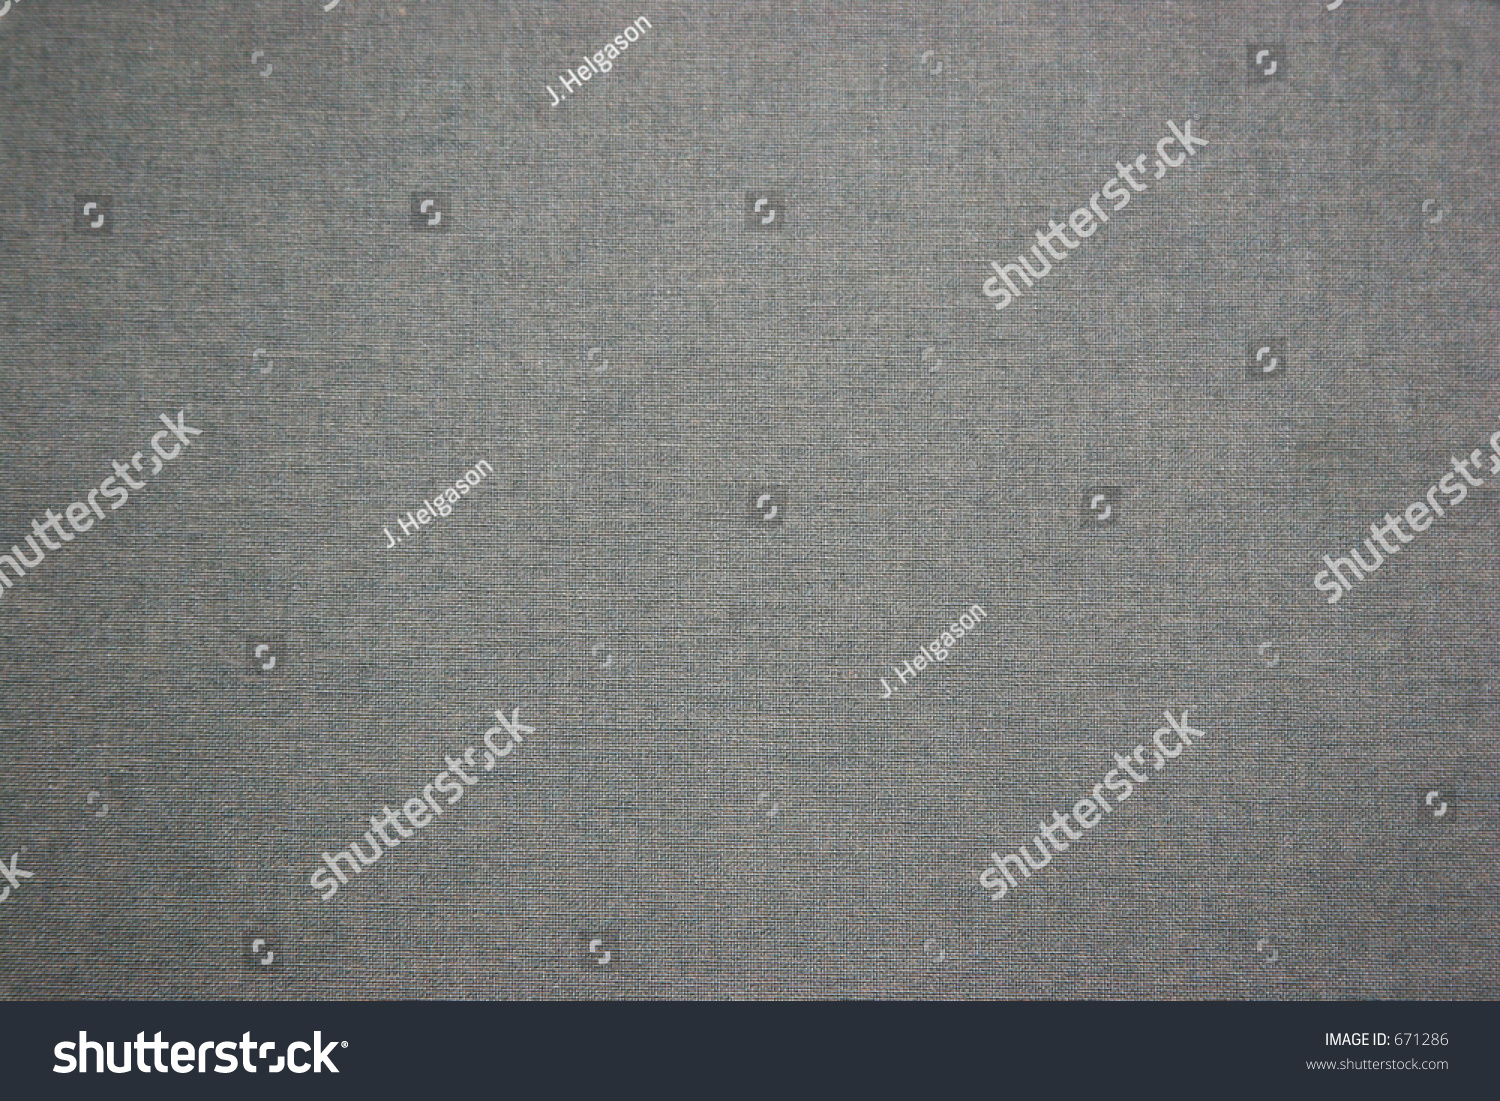 581 Cubicle texture Stock Photos, Images & Photography | Shutterstock